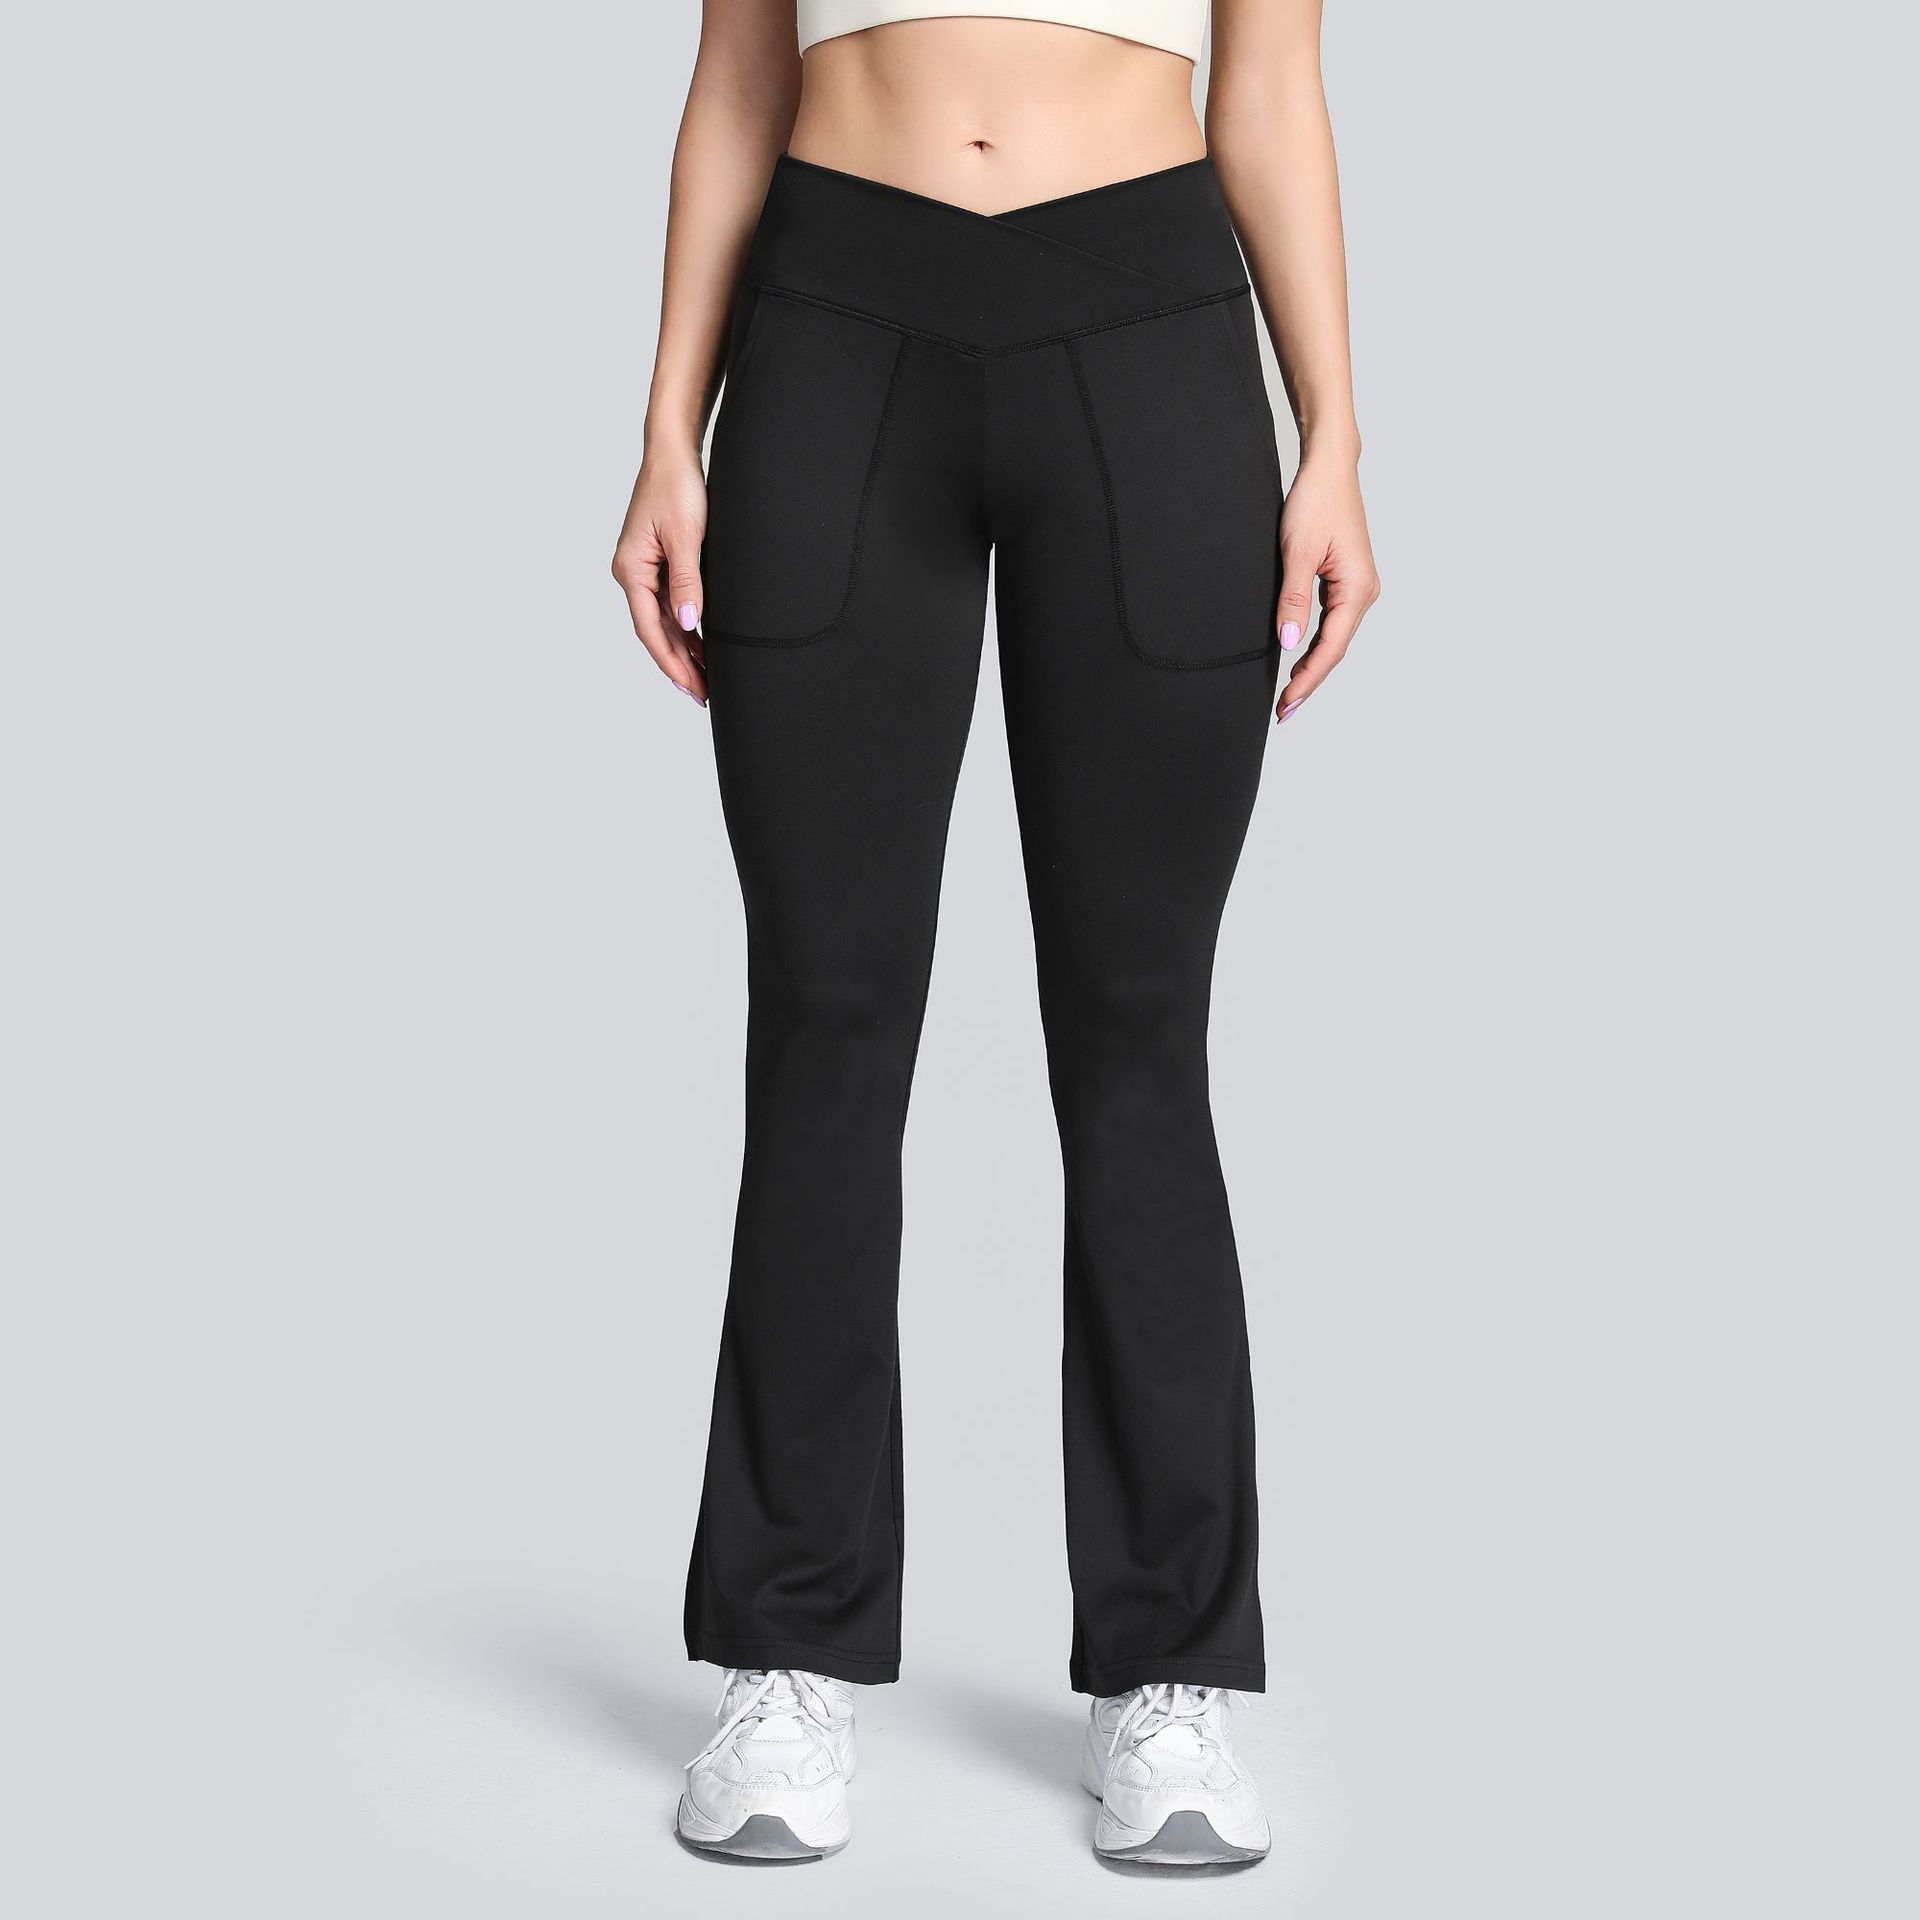 low rise exercise tights